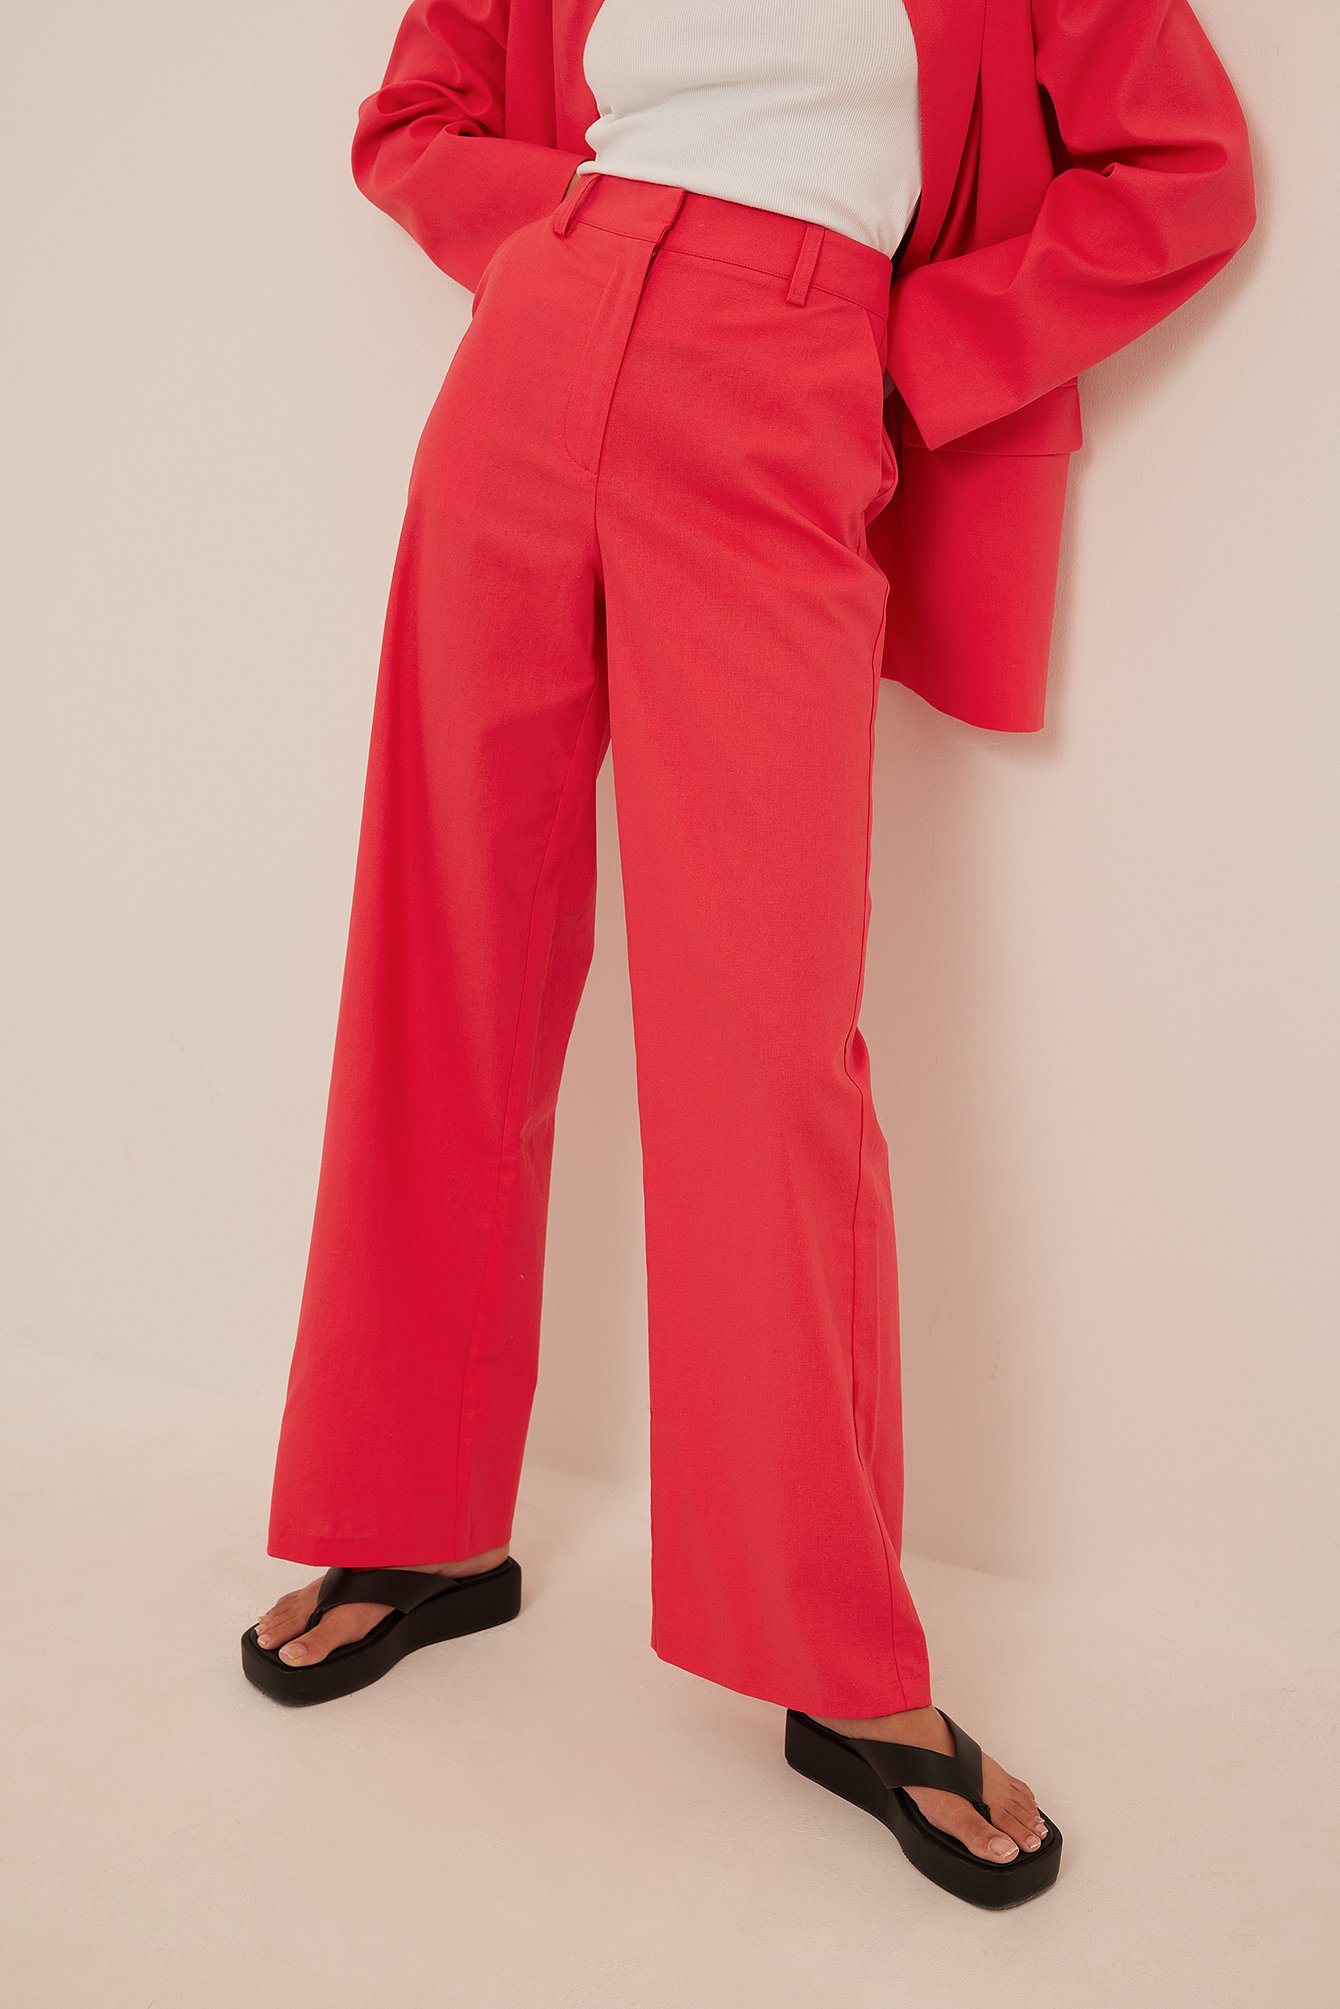 Womens Red Trousers